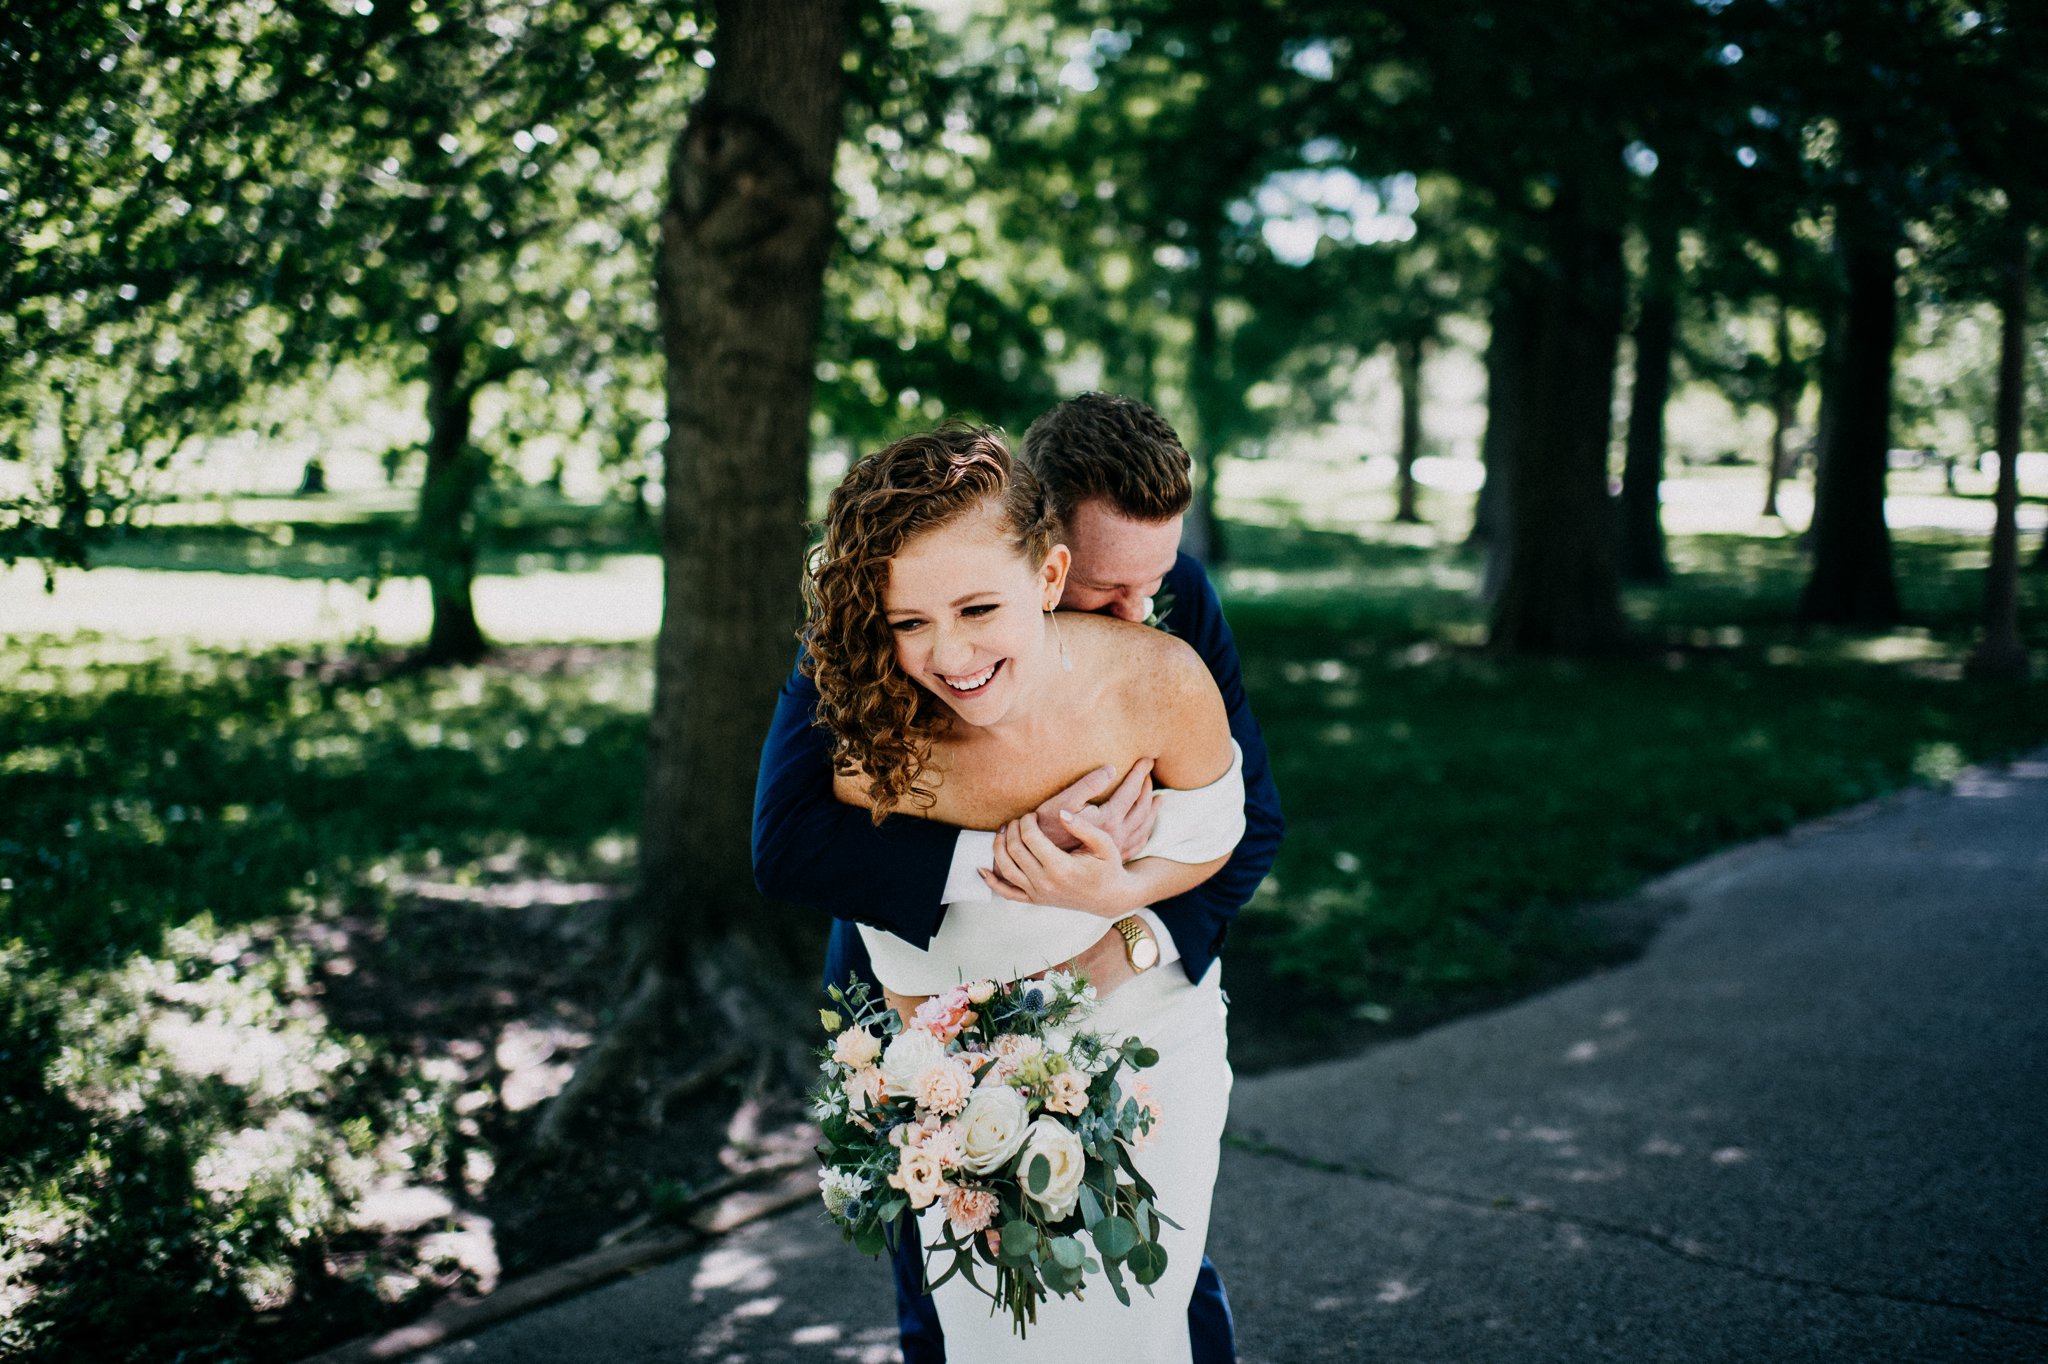 Bride and groom photo at their Tower Grove Park Elopement